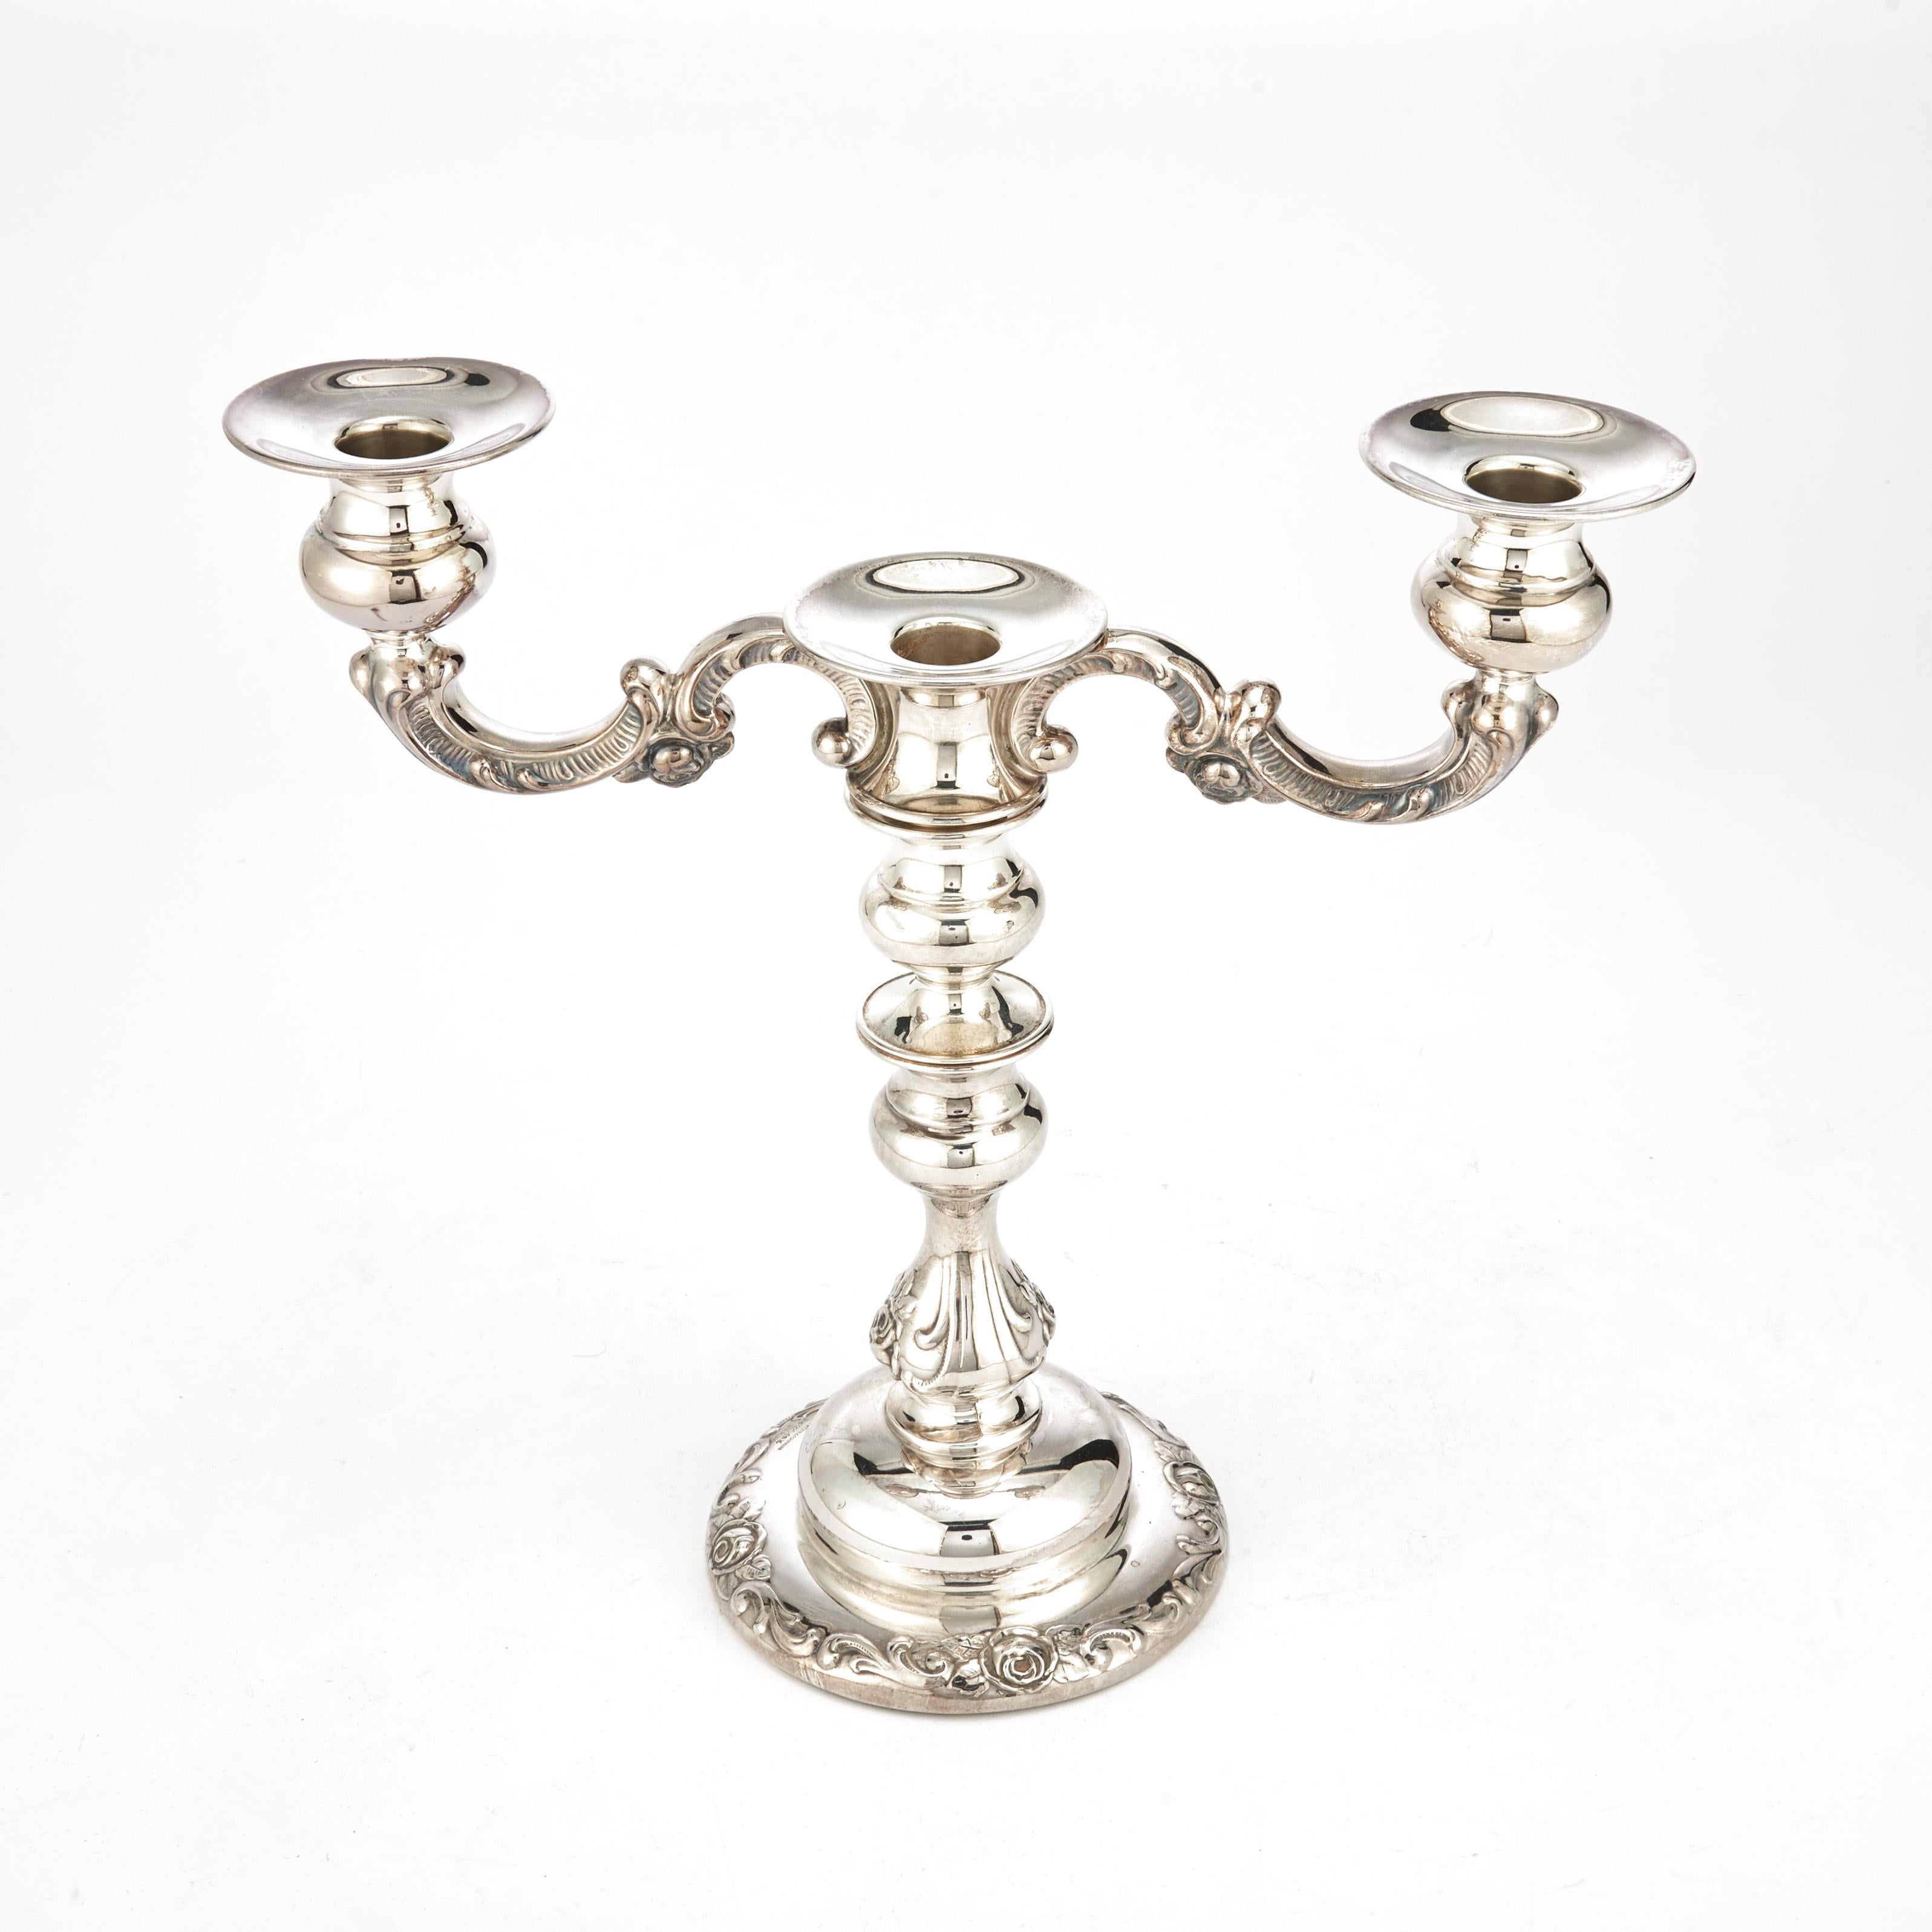 Indulge in the refined elegance of this exquisite five-light Sterling Silver Candelabra, meticulously designed by Spritzer & Fuhrmann. The candelabra is a true work of art, showcasing intricate floral and foliate details on its exterior, elevating